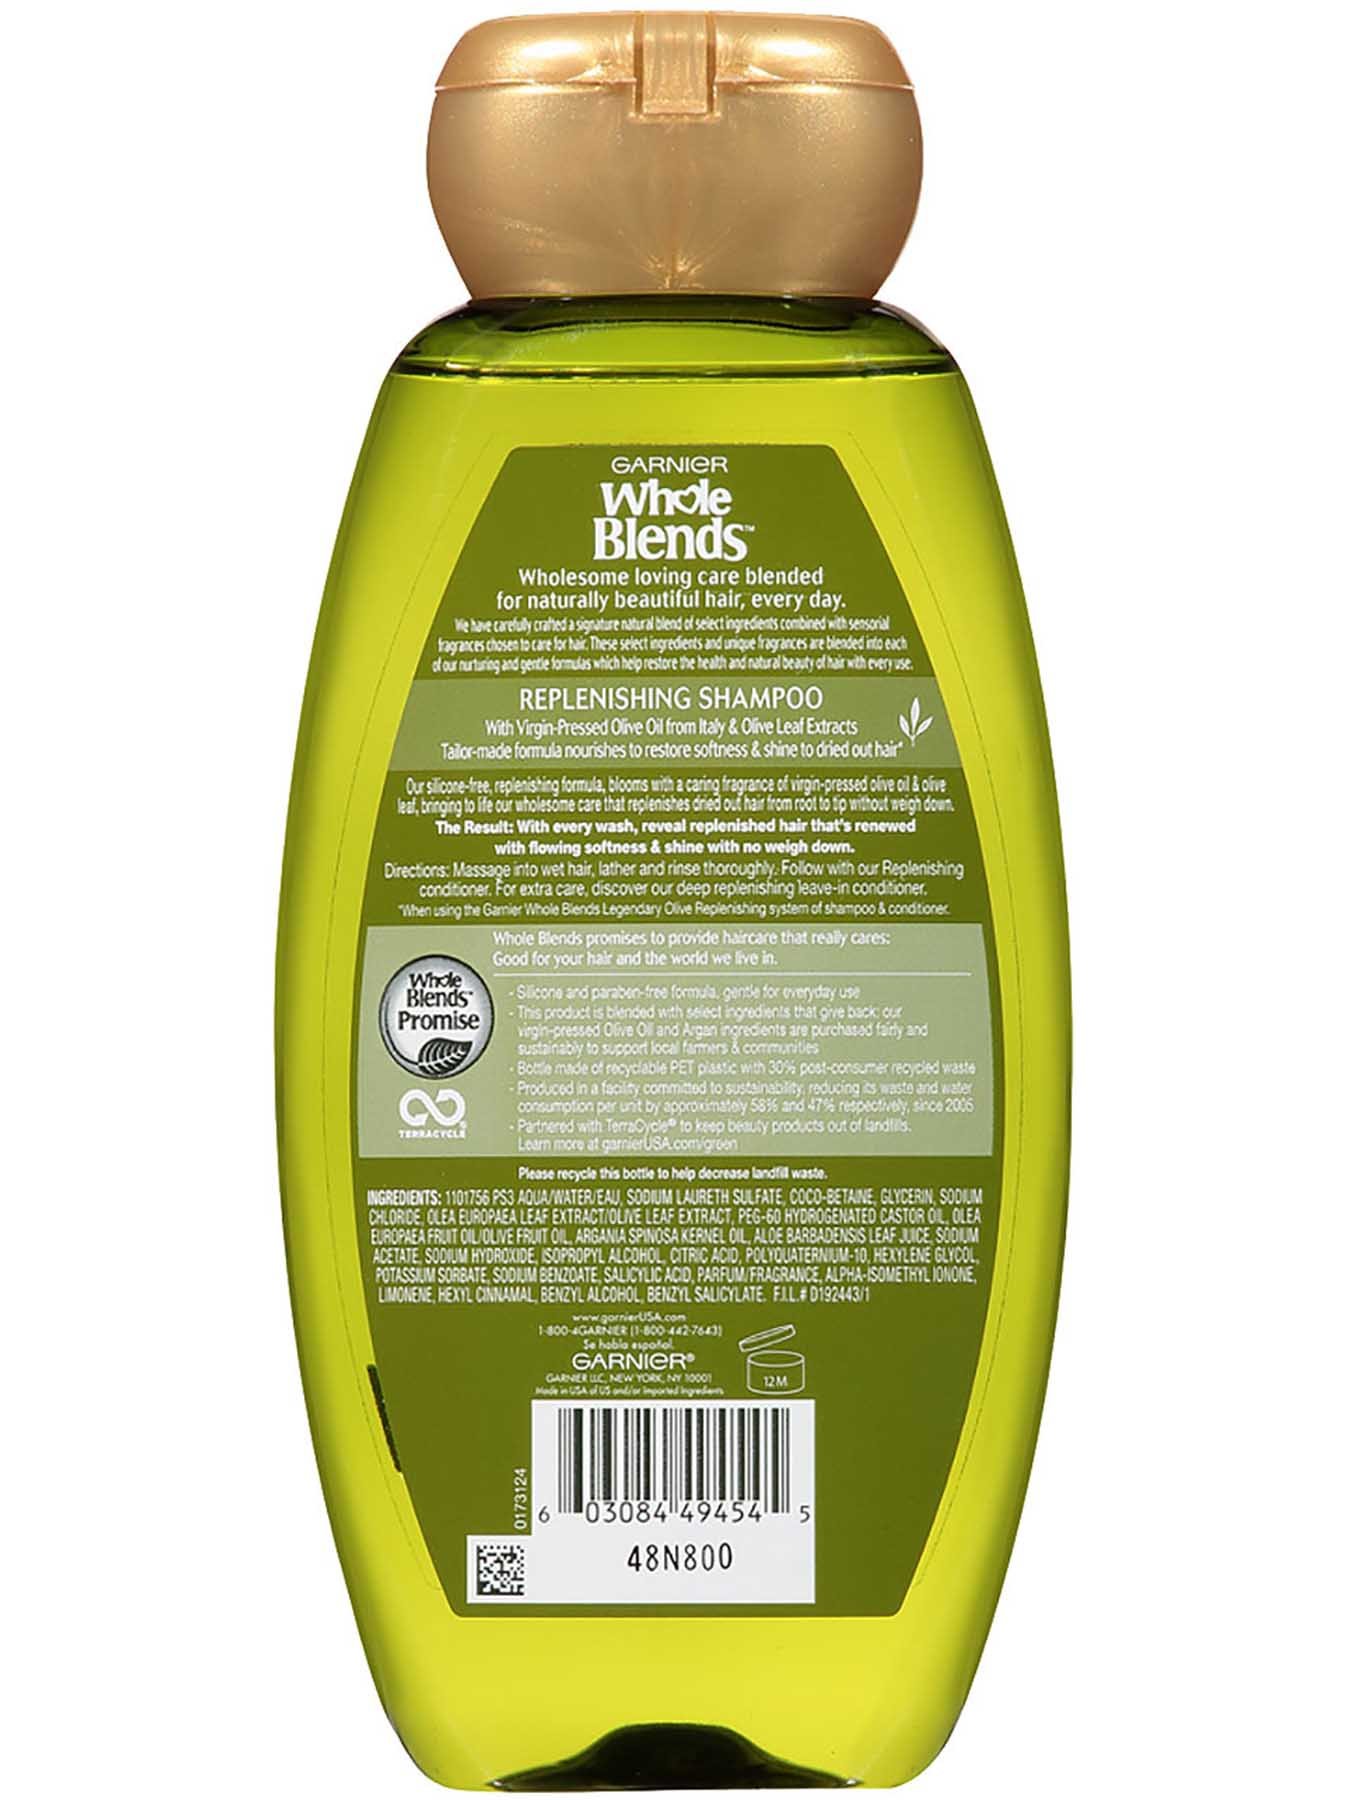 Back view of Replenishing Shampoo with Legendary Virgin-Pressed Olive Oil and Olive Leaf Extracts.